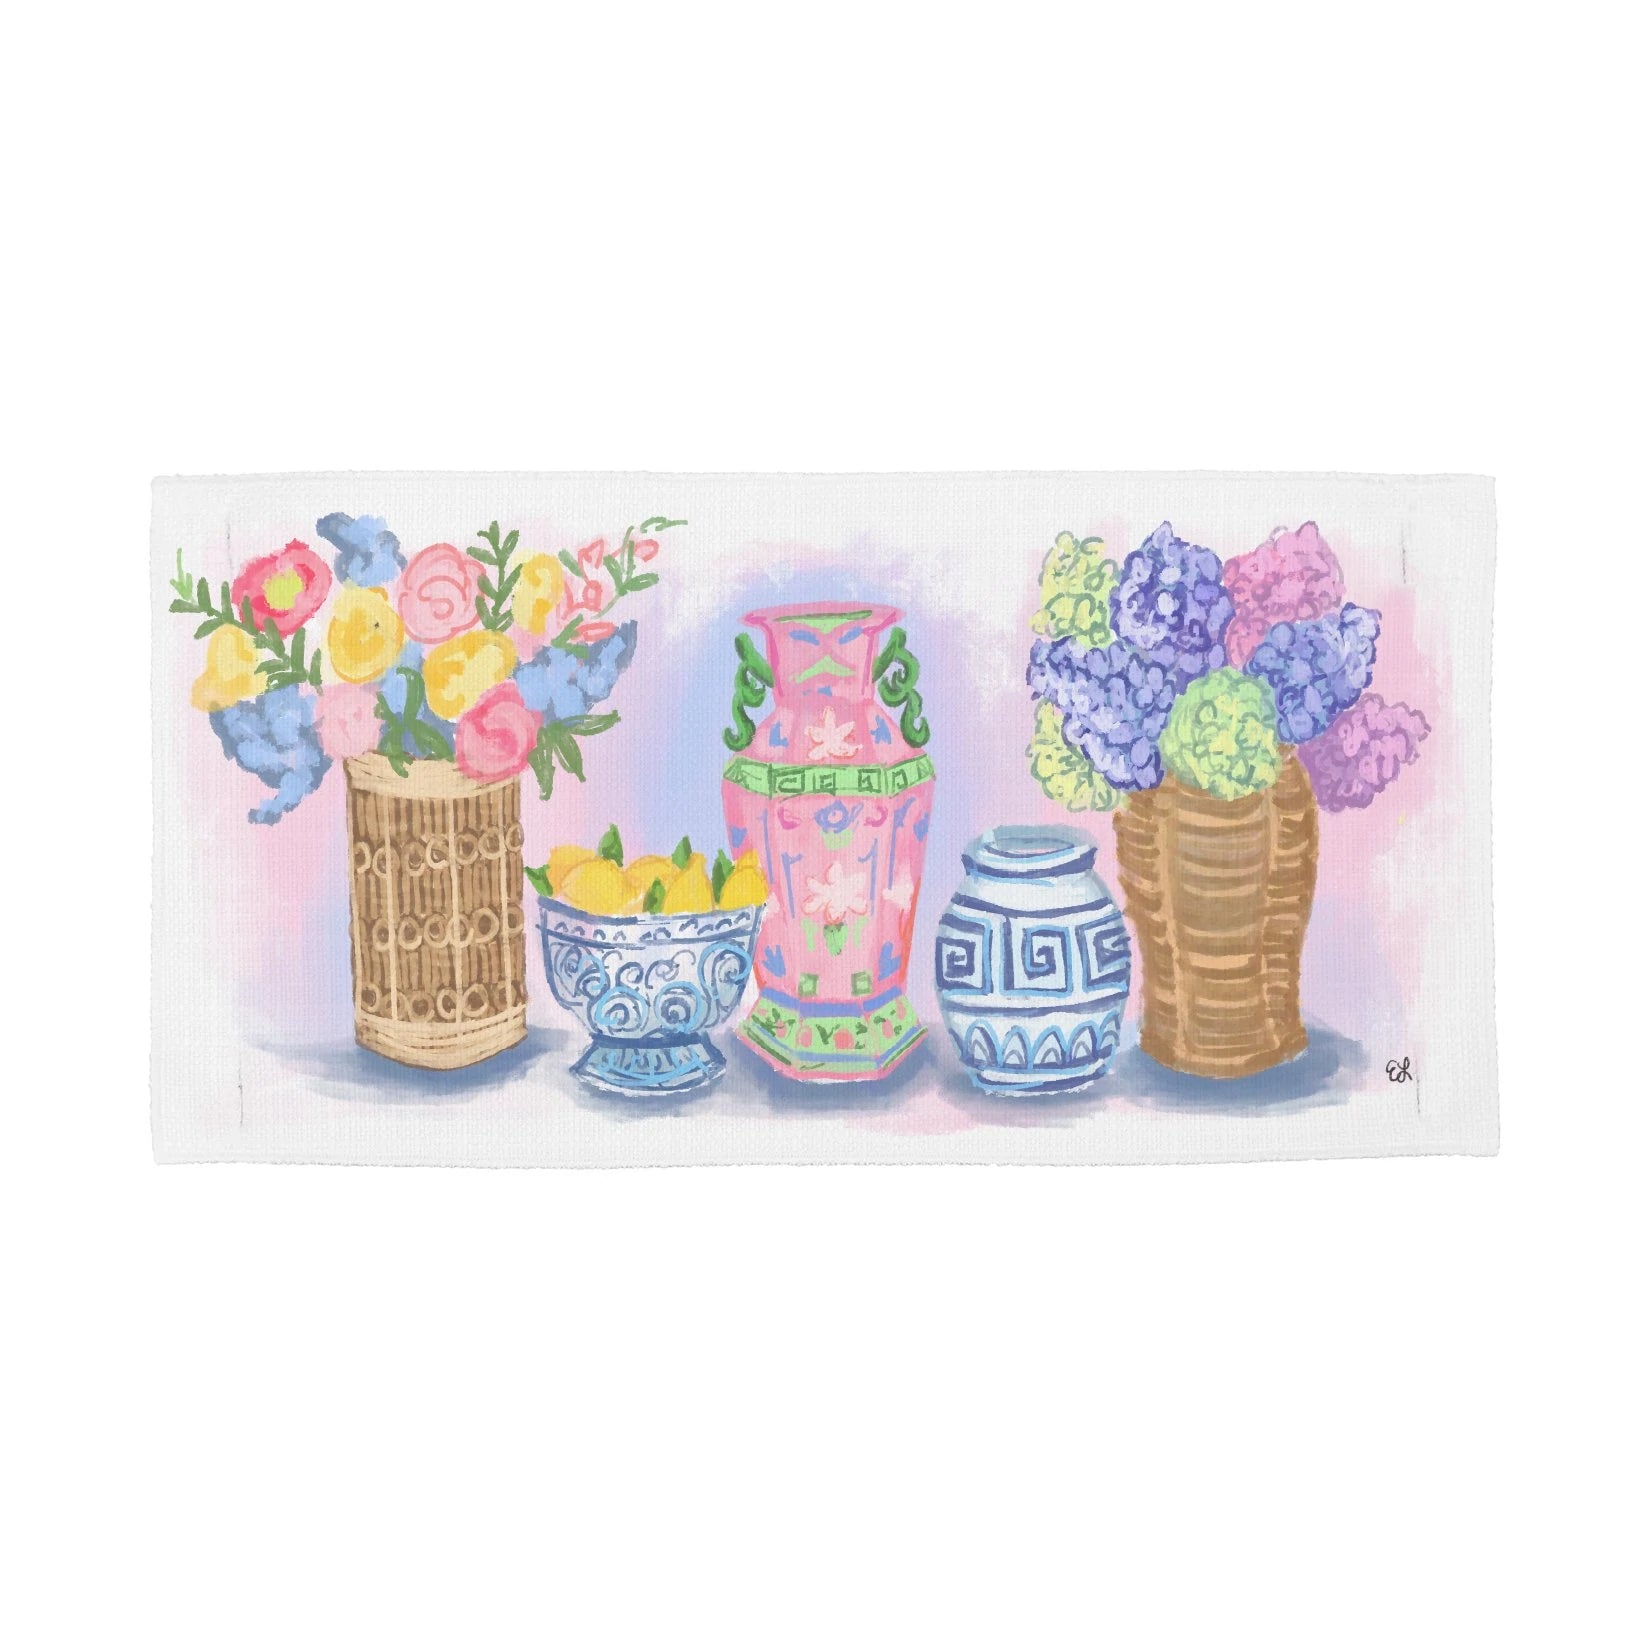 Pastel Colored Pillow Swap with vases filled with flowers and lemons